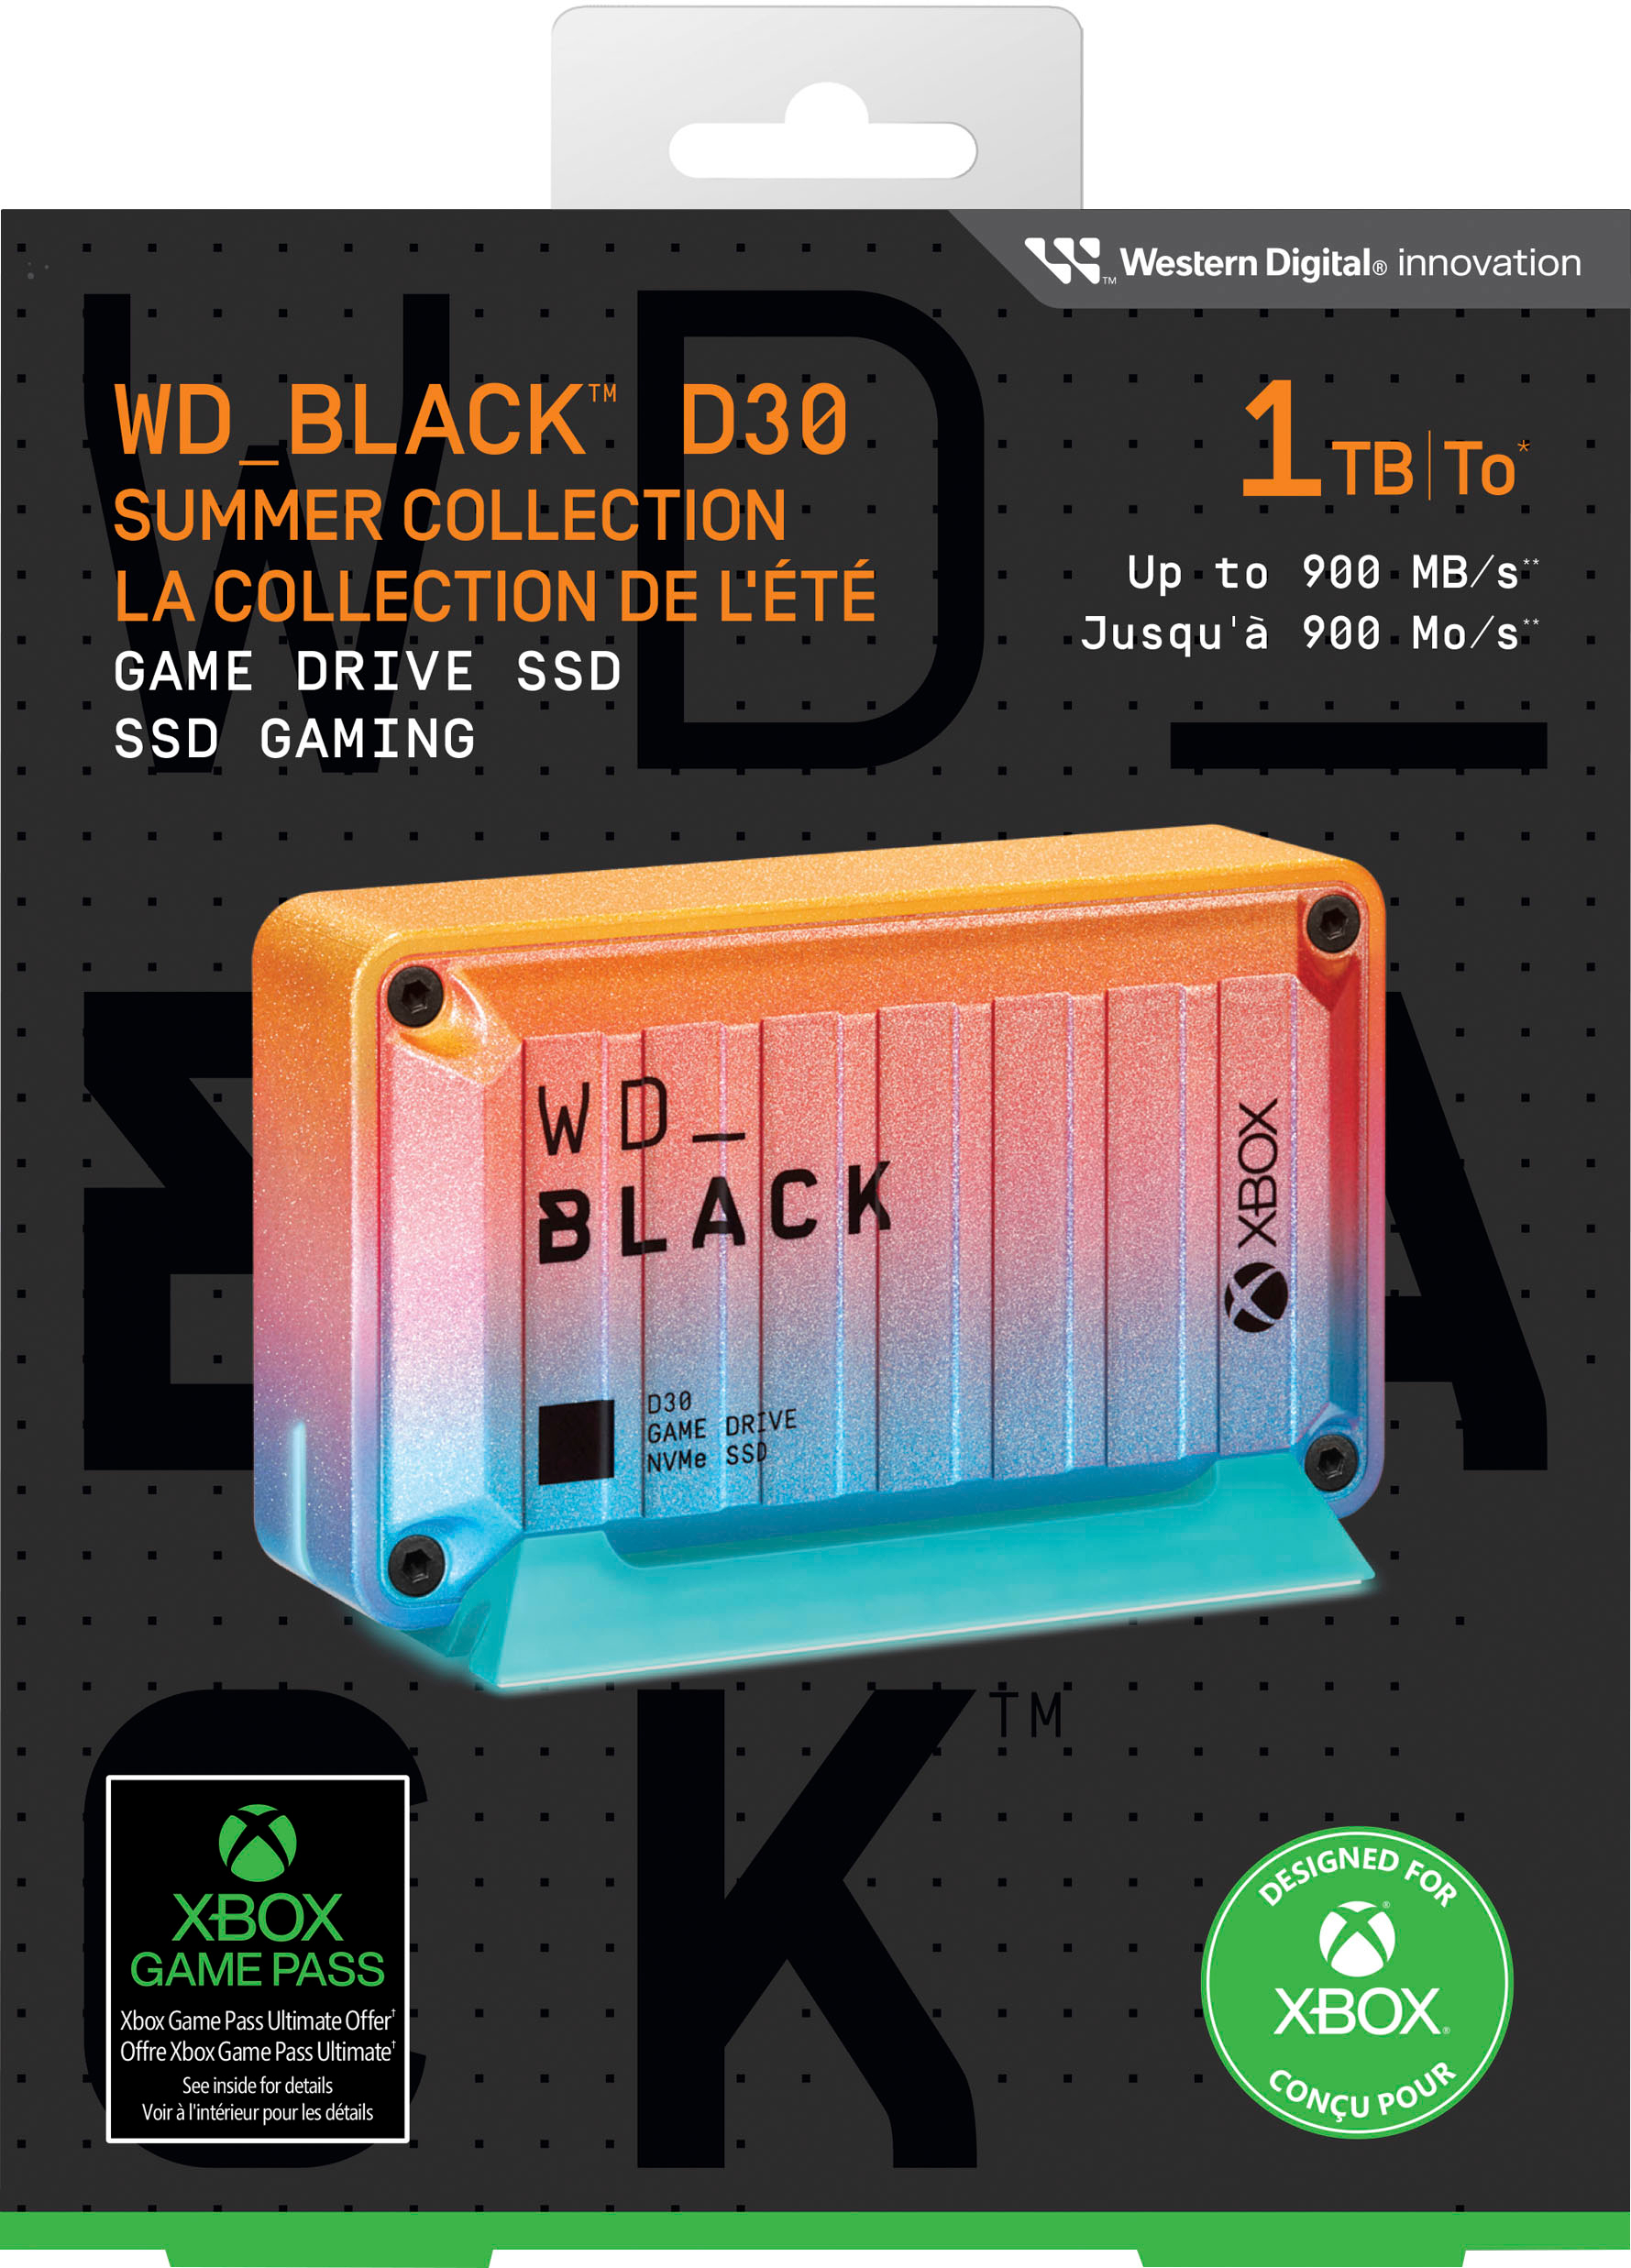 Left View: WD - D30 Game Drive for Xbox 1TB External USB Type C Portable SSD - Summer Collection